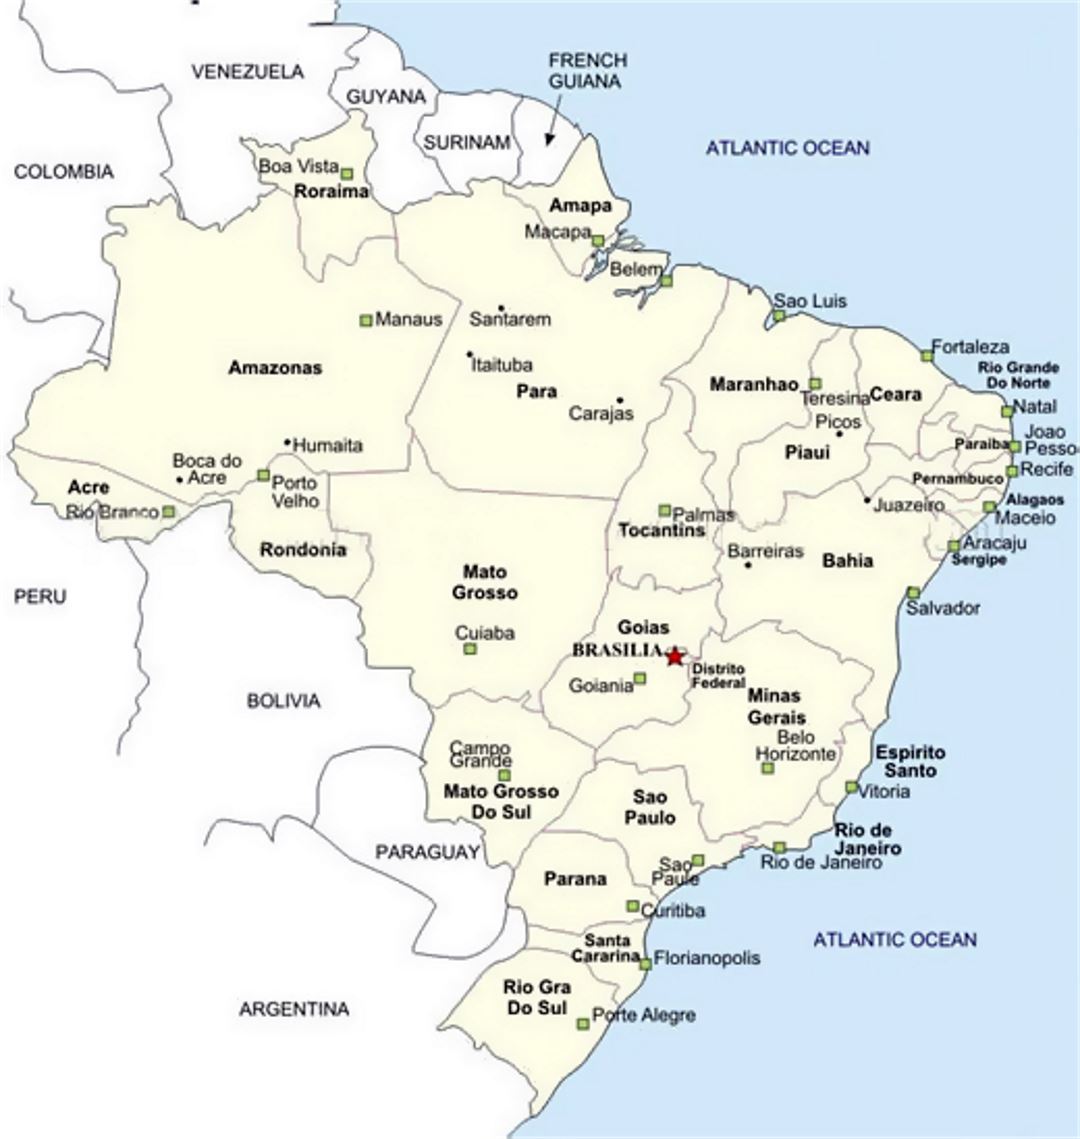 Map of Brazil with cities